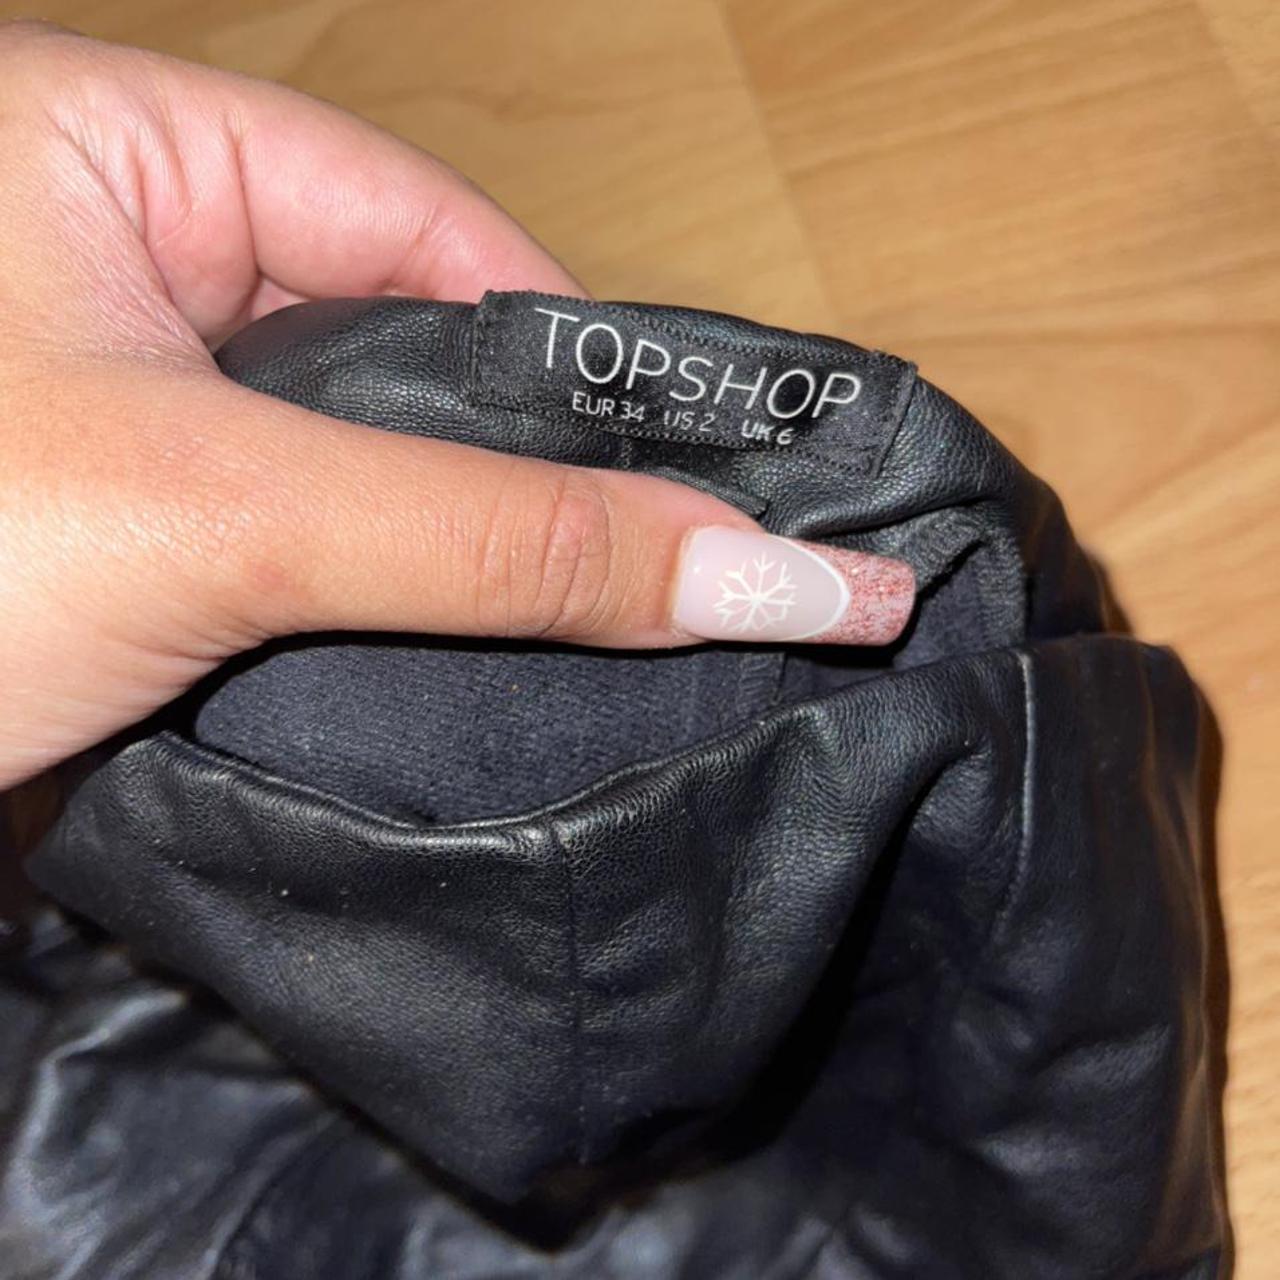 Top shop leather leggings size 6 but could easily